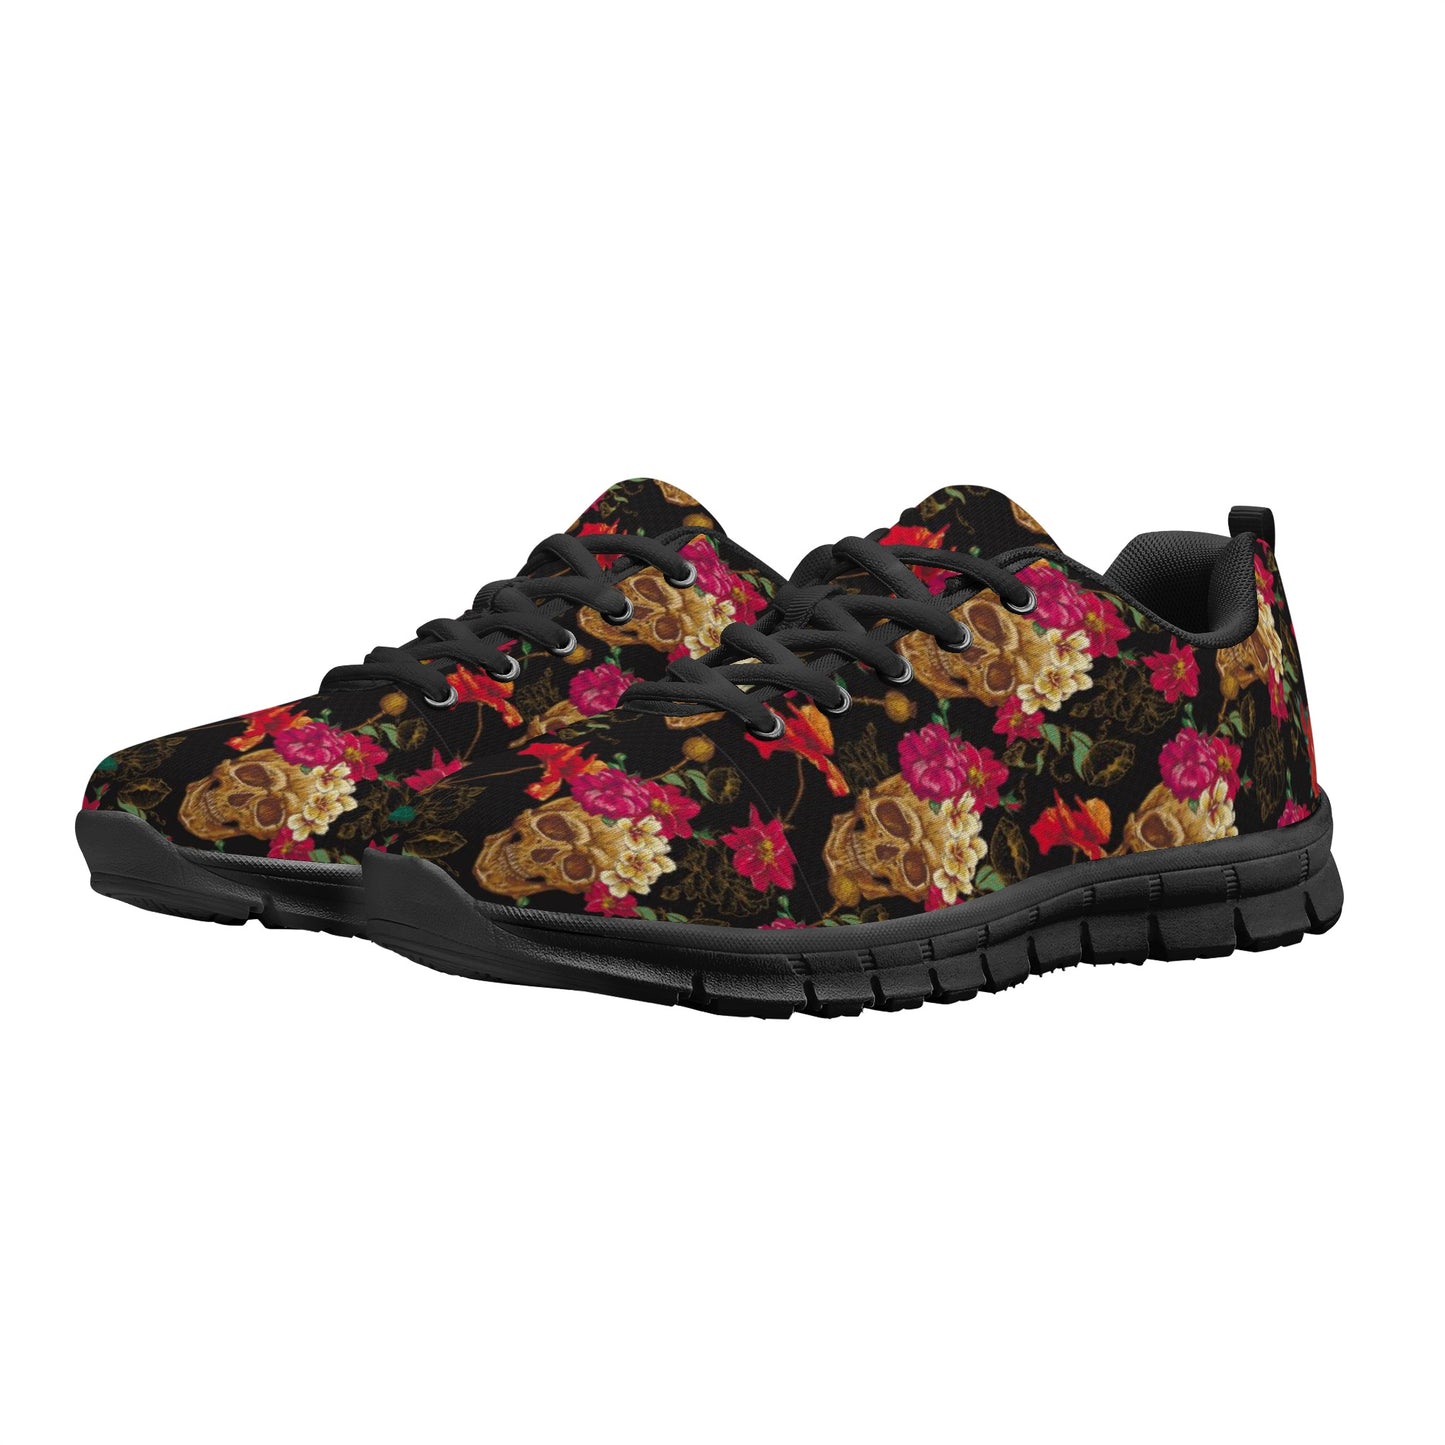 Sugar skull day of the dead Women's Running Shoes